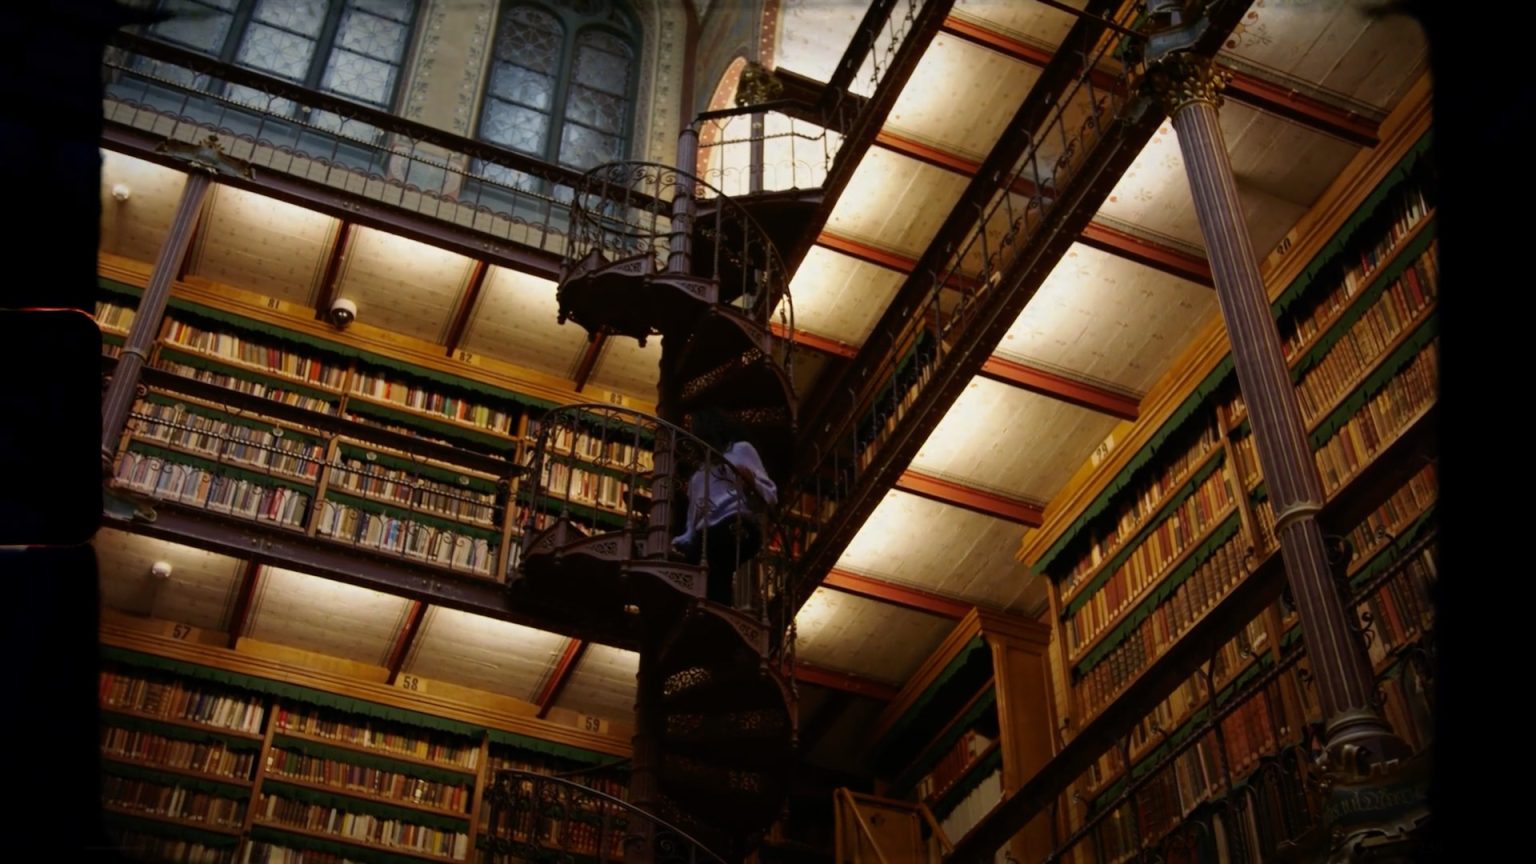 Still from Vaandeldrager - Rijksmuseum. A wide shot pointed up at a winding staircase in the middle of a huge library. A woman with a pastel lilac coloured sweater is walking up the stairs.